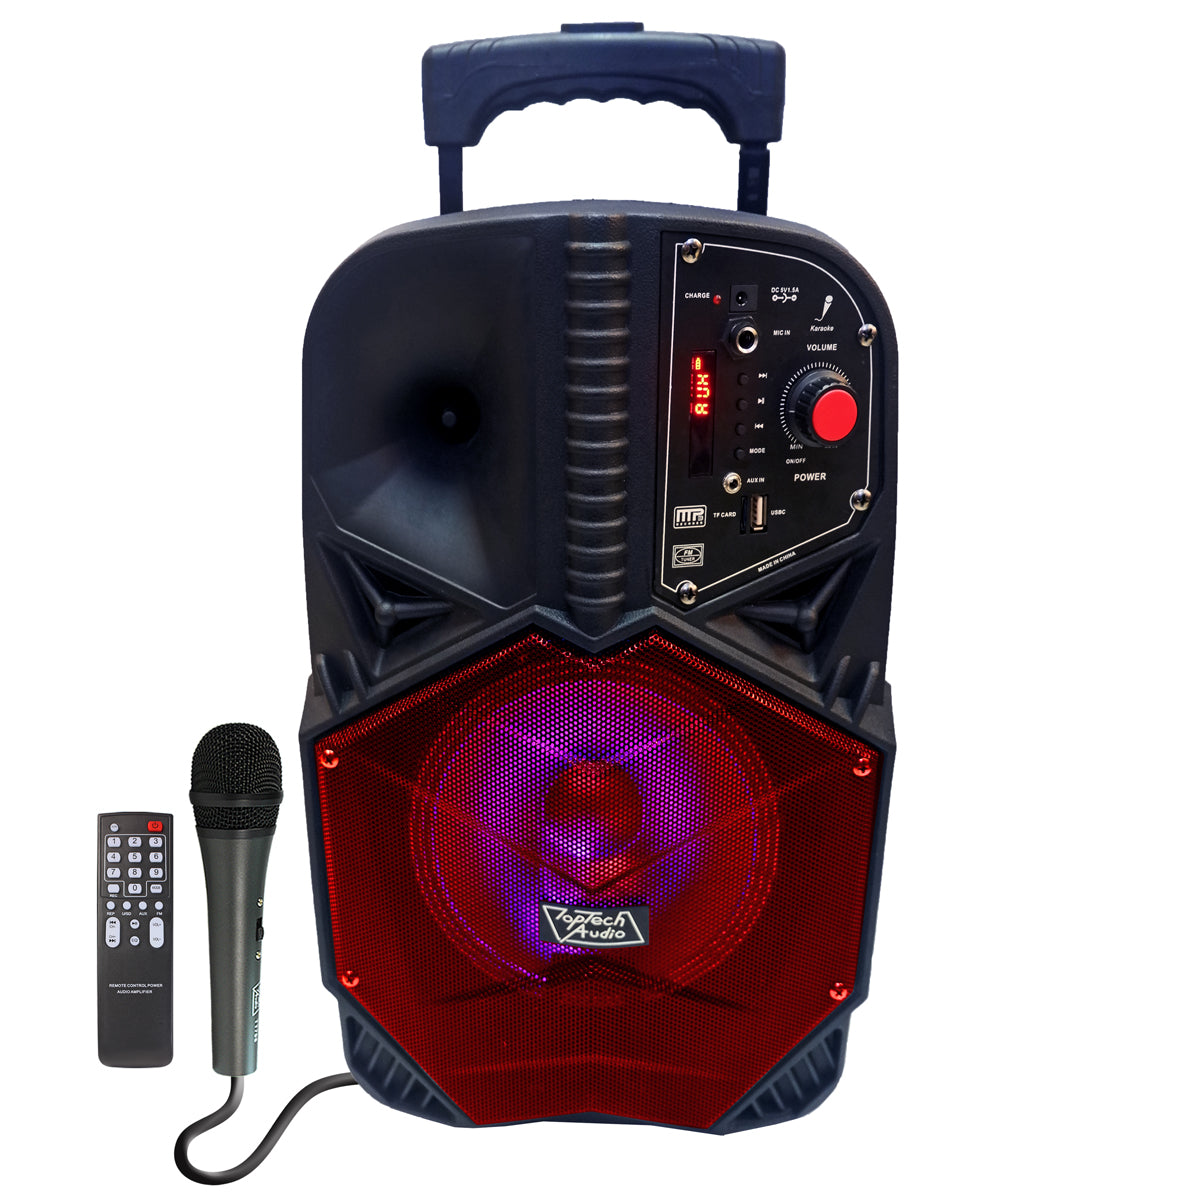 TOPTECH BLADE-8, 8-Inches Fully Amplified Speaker, Portable with Trolley Handle audio,1600 Watts Peak Power Sound Speaker with LED Light & Microphone